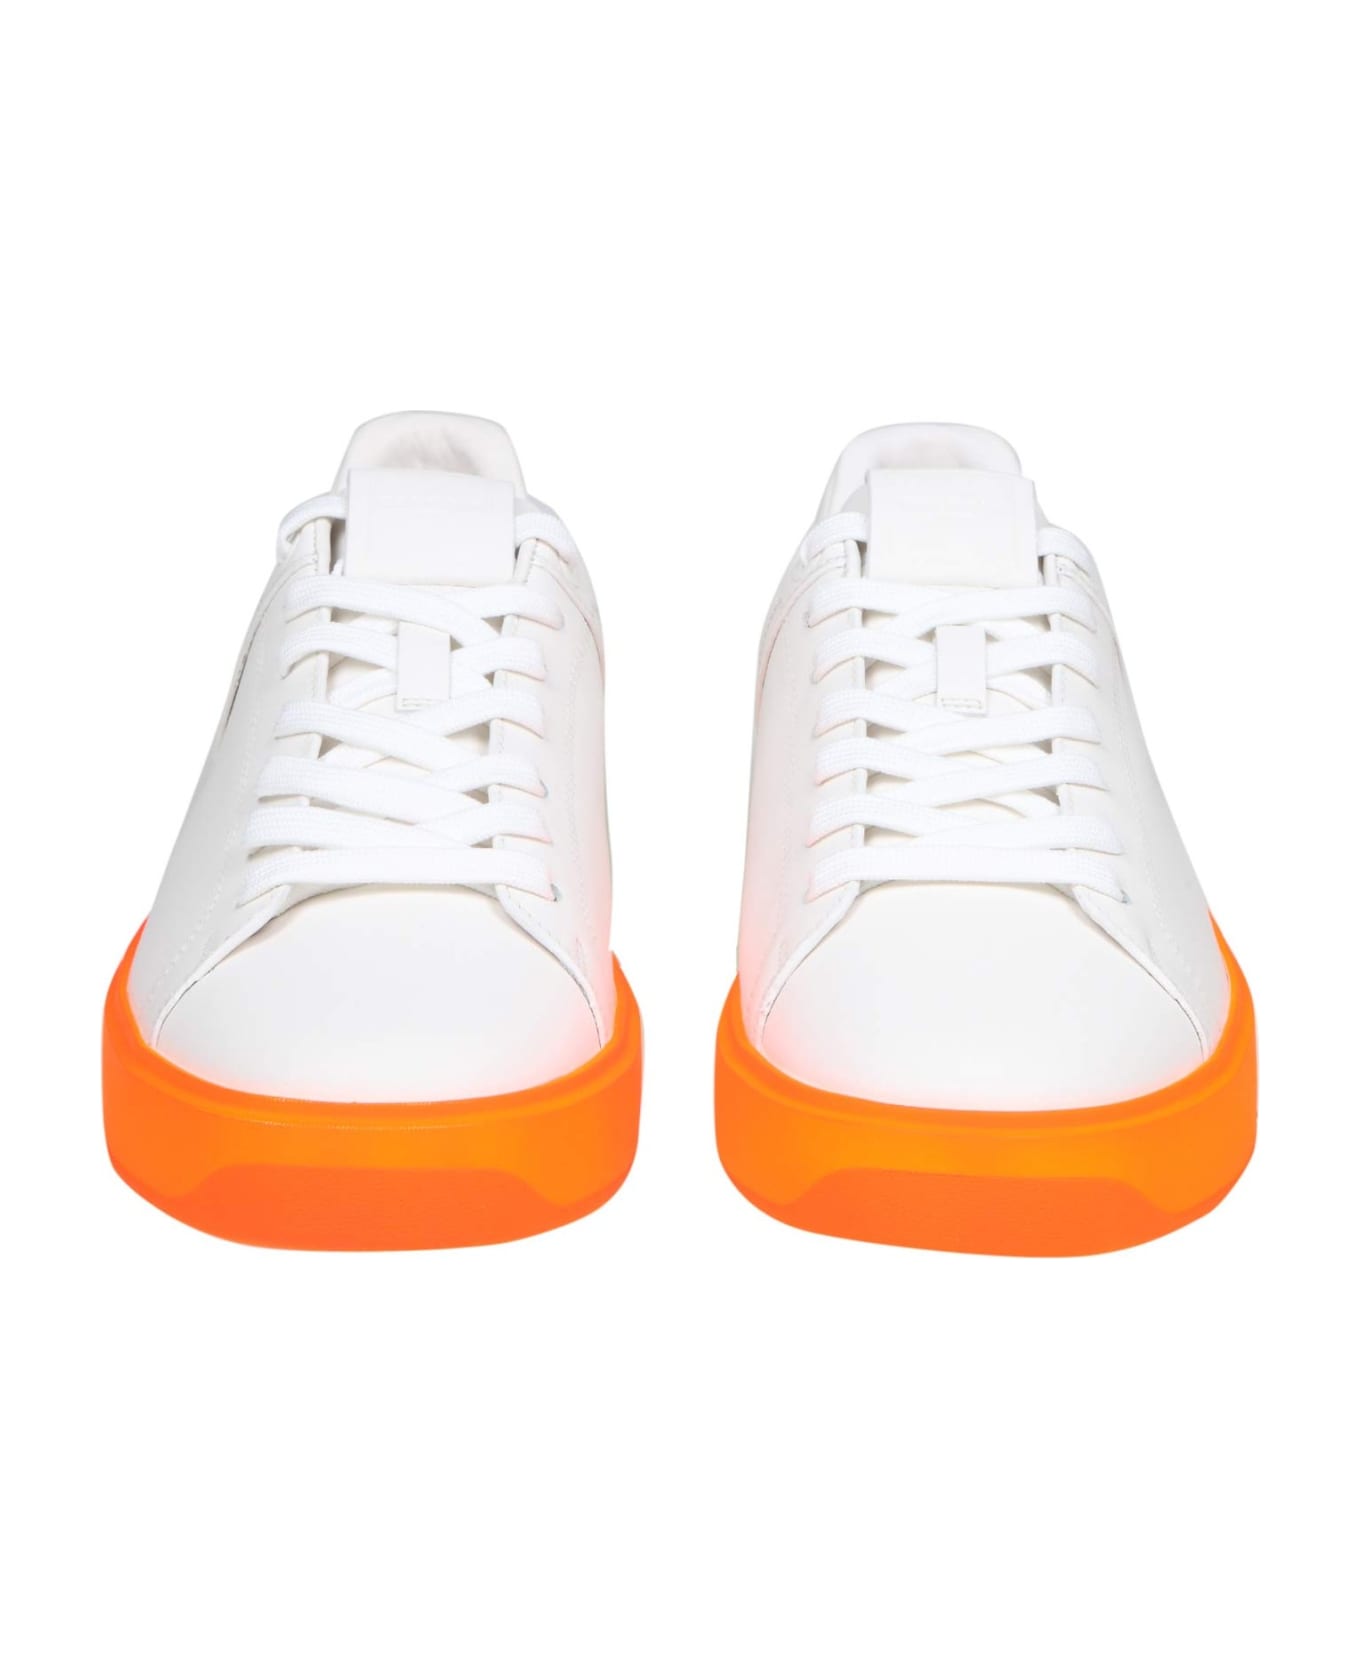 Balmain B Court Sneakers In White Leather With Two-tone Sole - white/multicolor